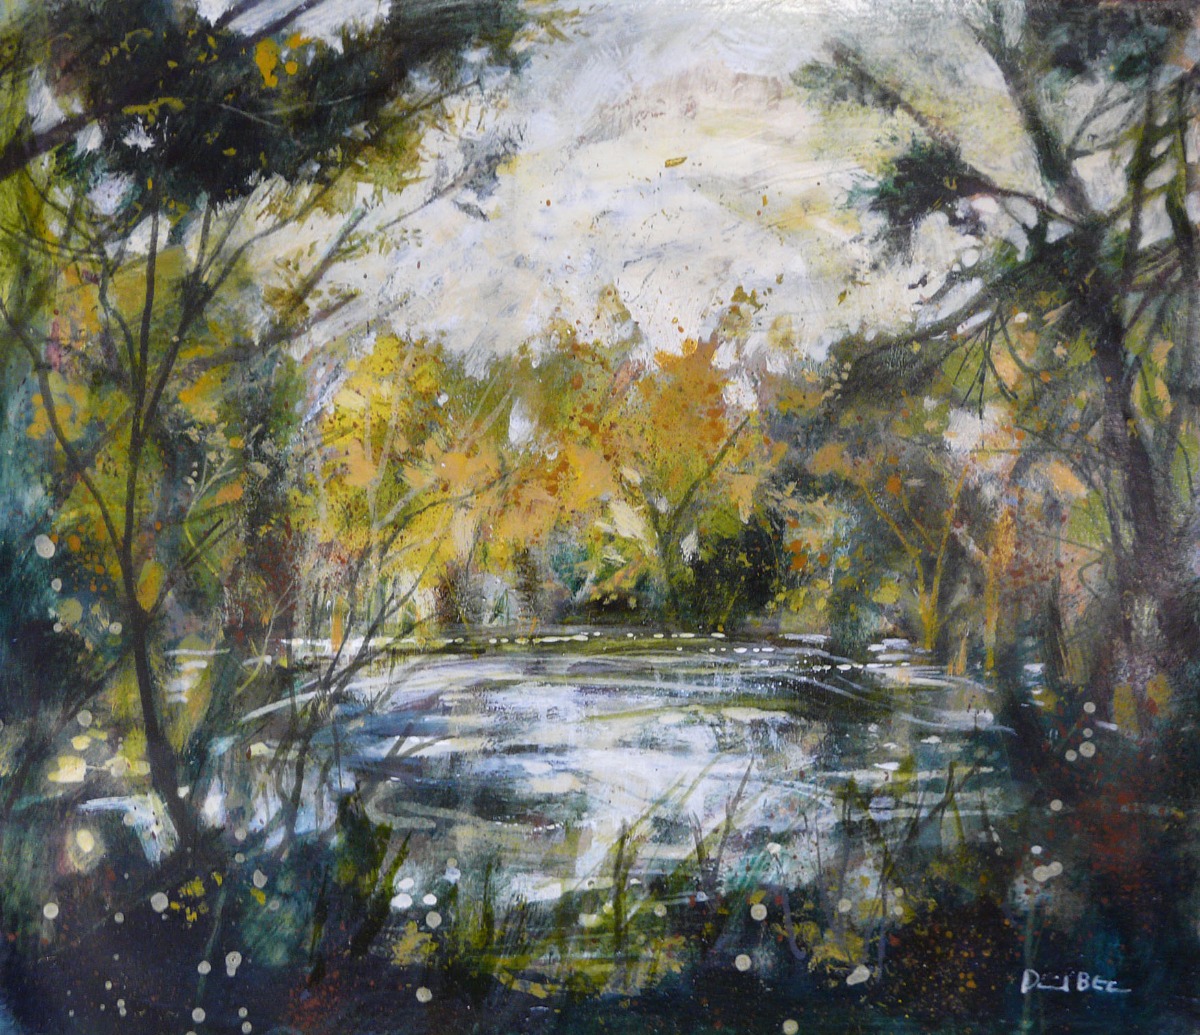 The Pool by David Bez, Landscape | Water